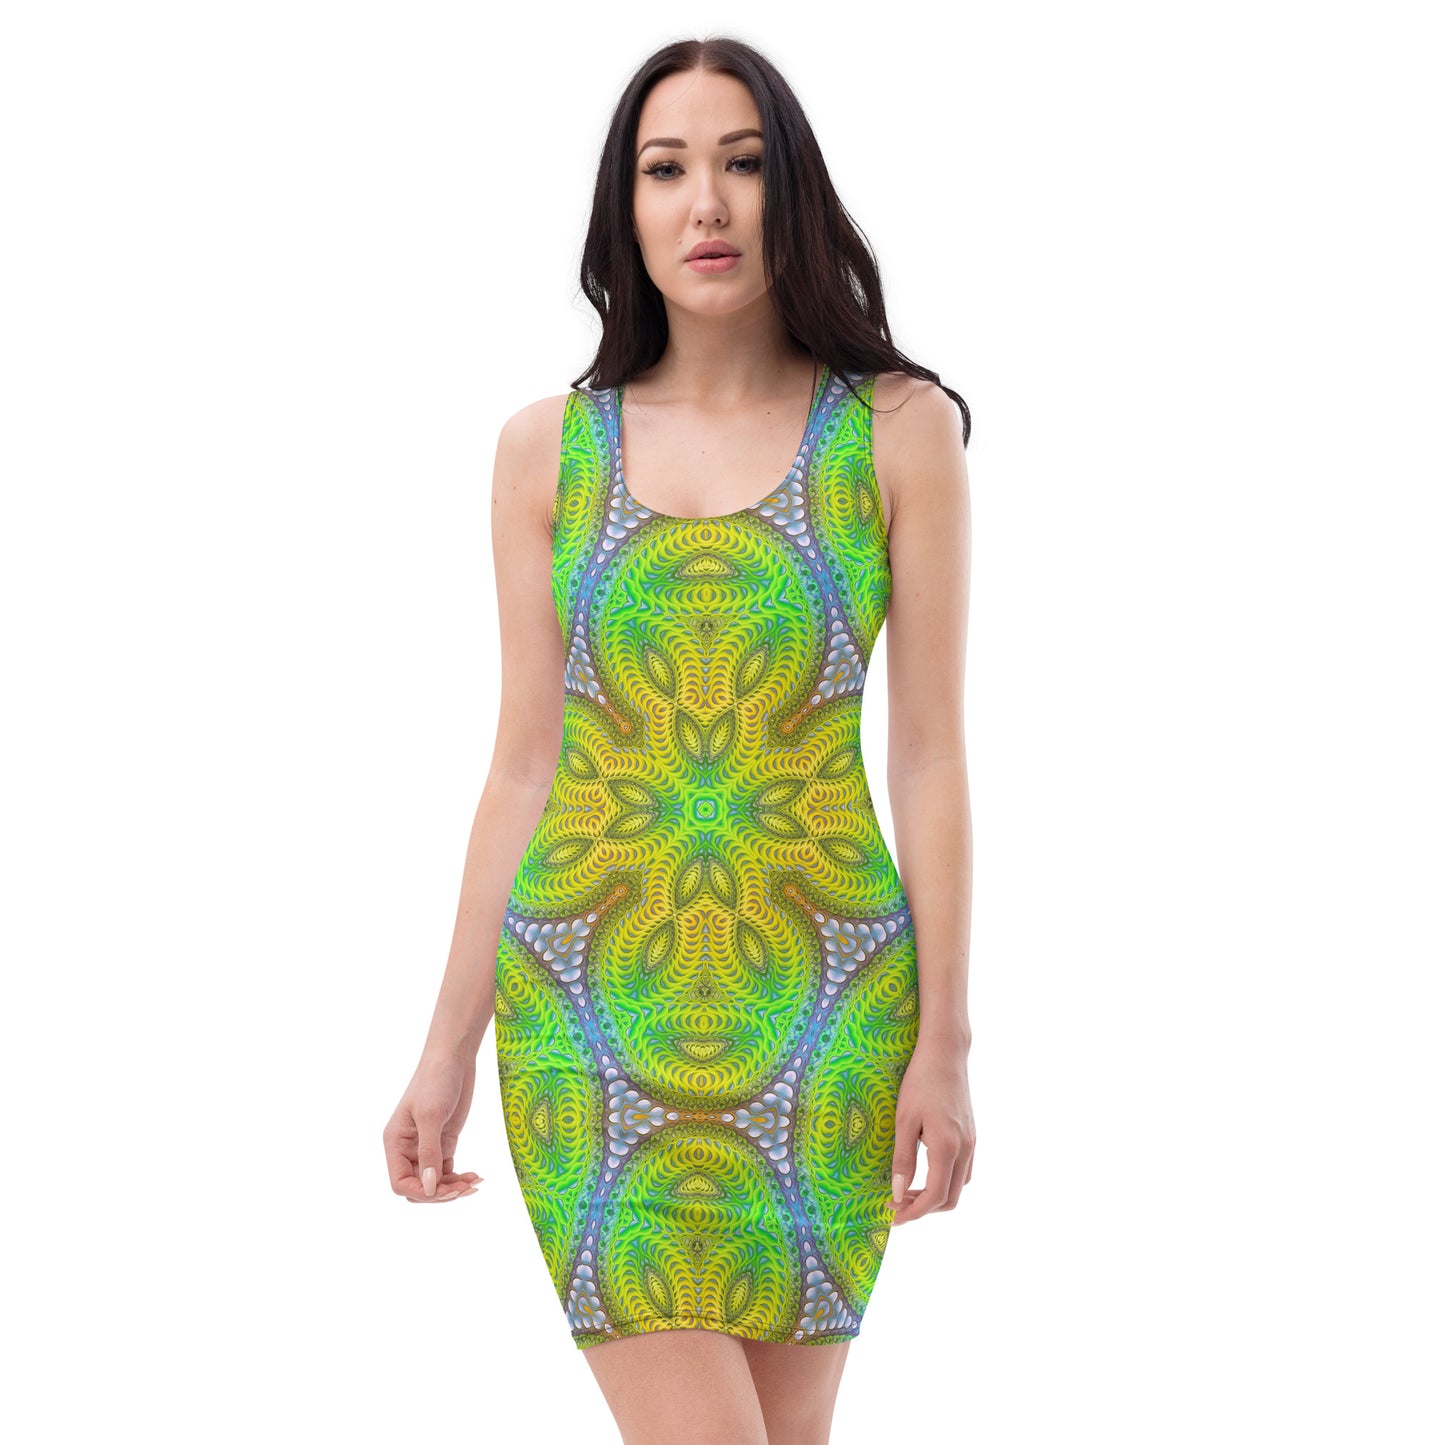 "Activation Initiated (Pattern V2)" Bodycon FITTED DRESS